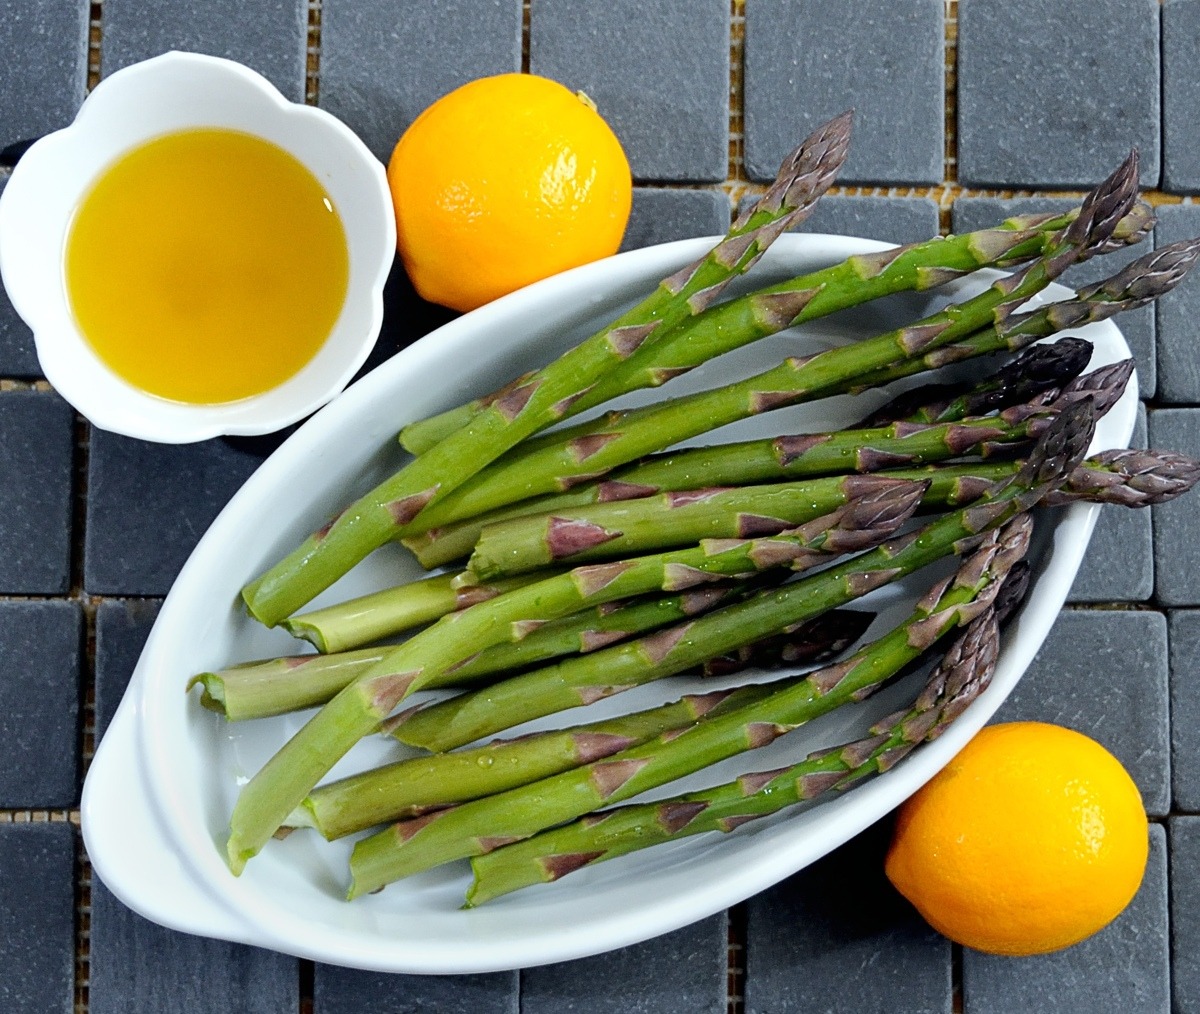 Roasted Asparagus with Lemon-Chive Chili Oil, Display of Ingredients